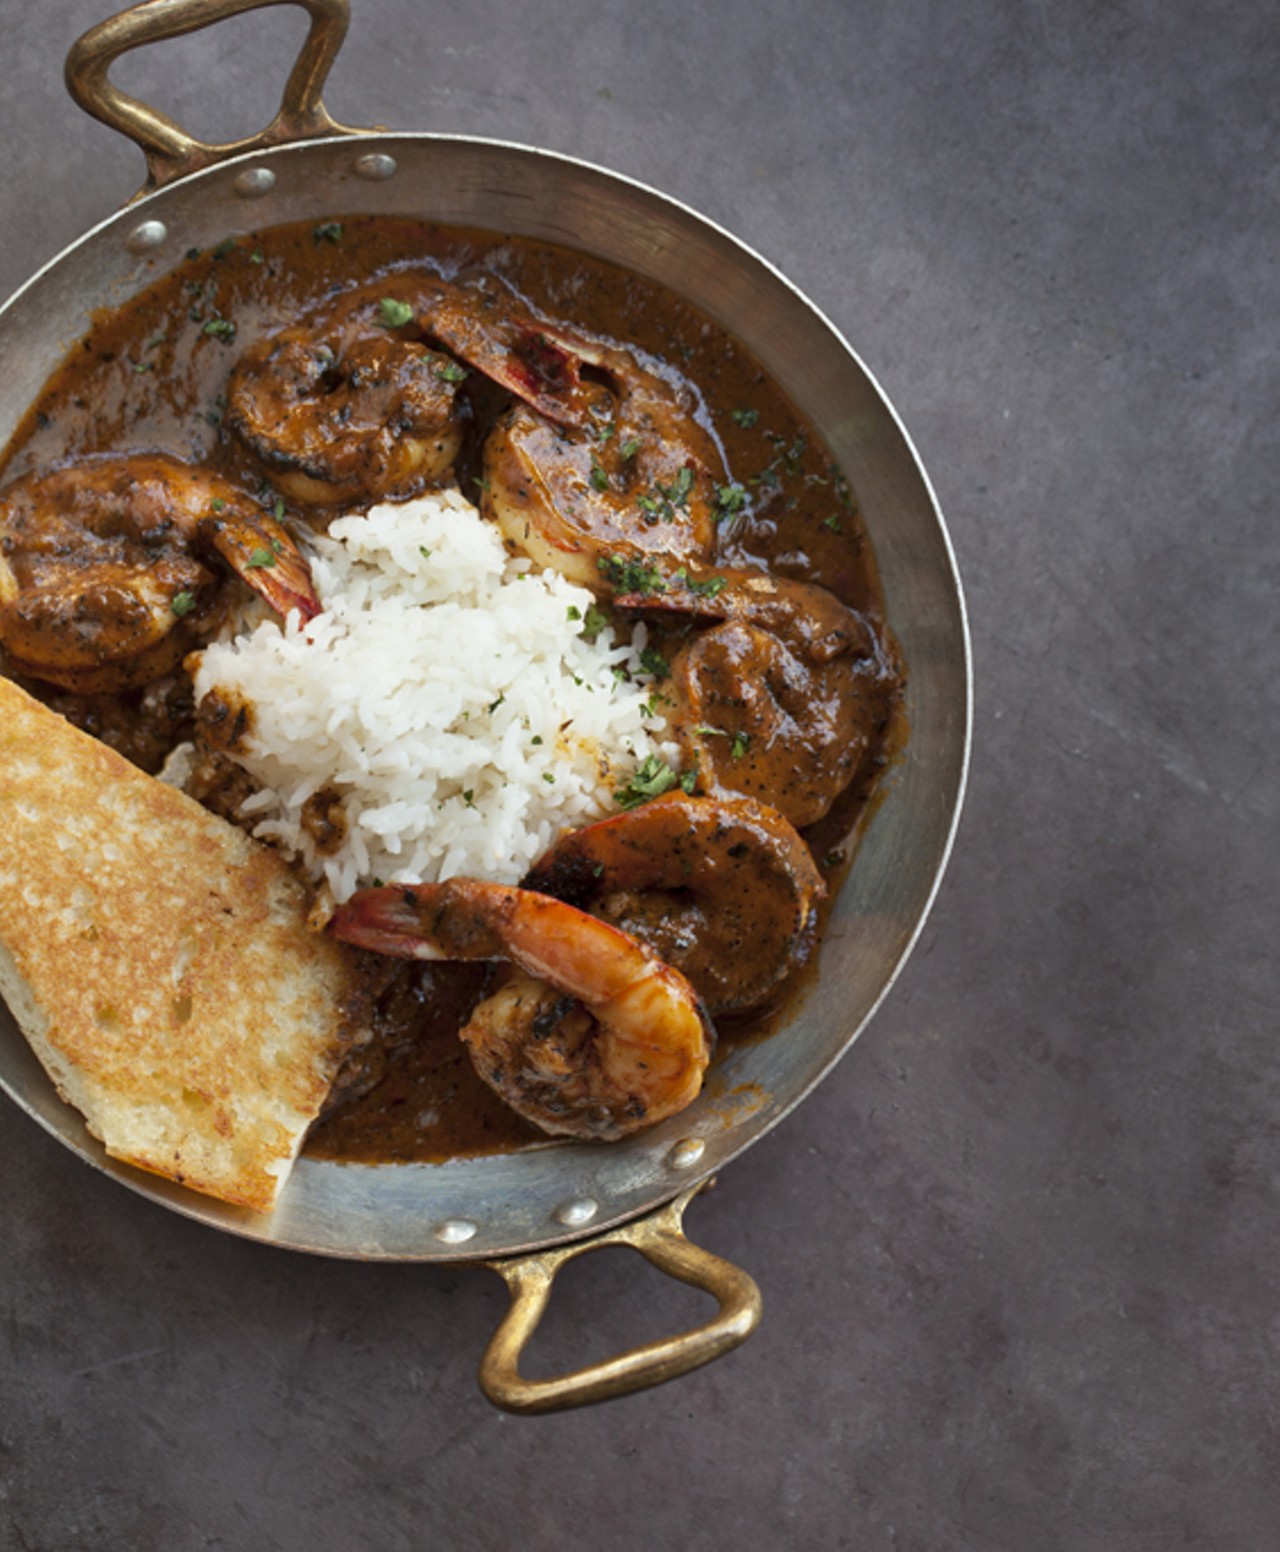 Shrimp New Orleans in a Creole sauce with basmati rice